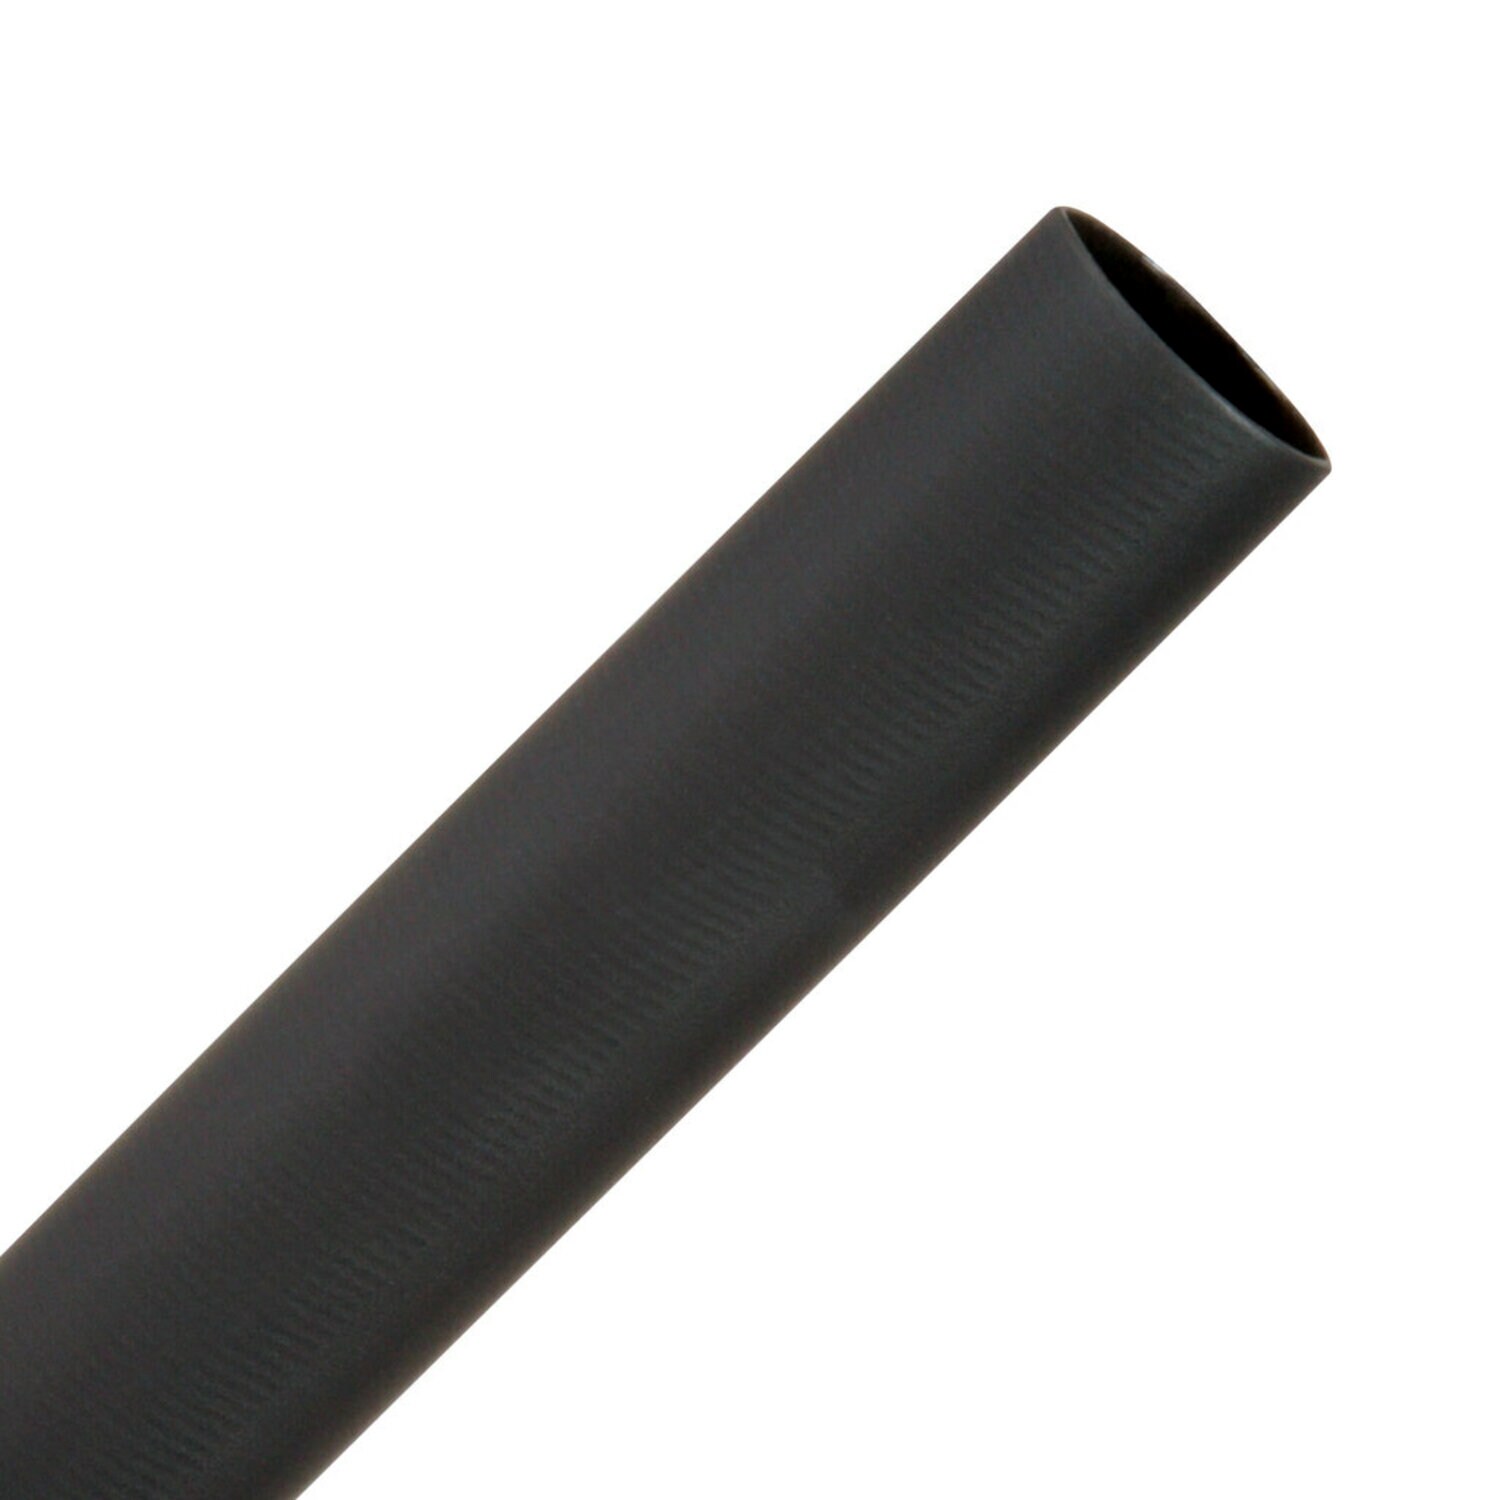 7000133598 - 3M Thin-Wall Heat Shrink Tubing EPS-300, Adhesive-Lined,
1/2-48"-Black-Hdr-12 Pcs, 48 in length sticks, 12 pieces/case